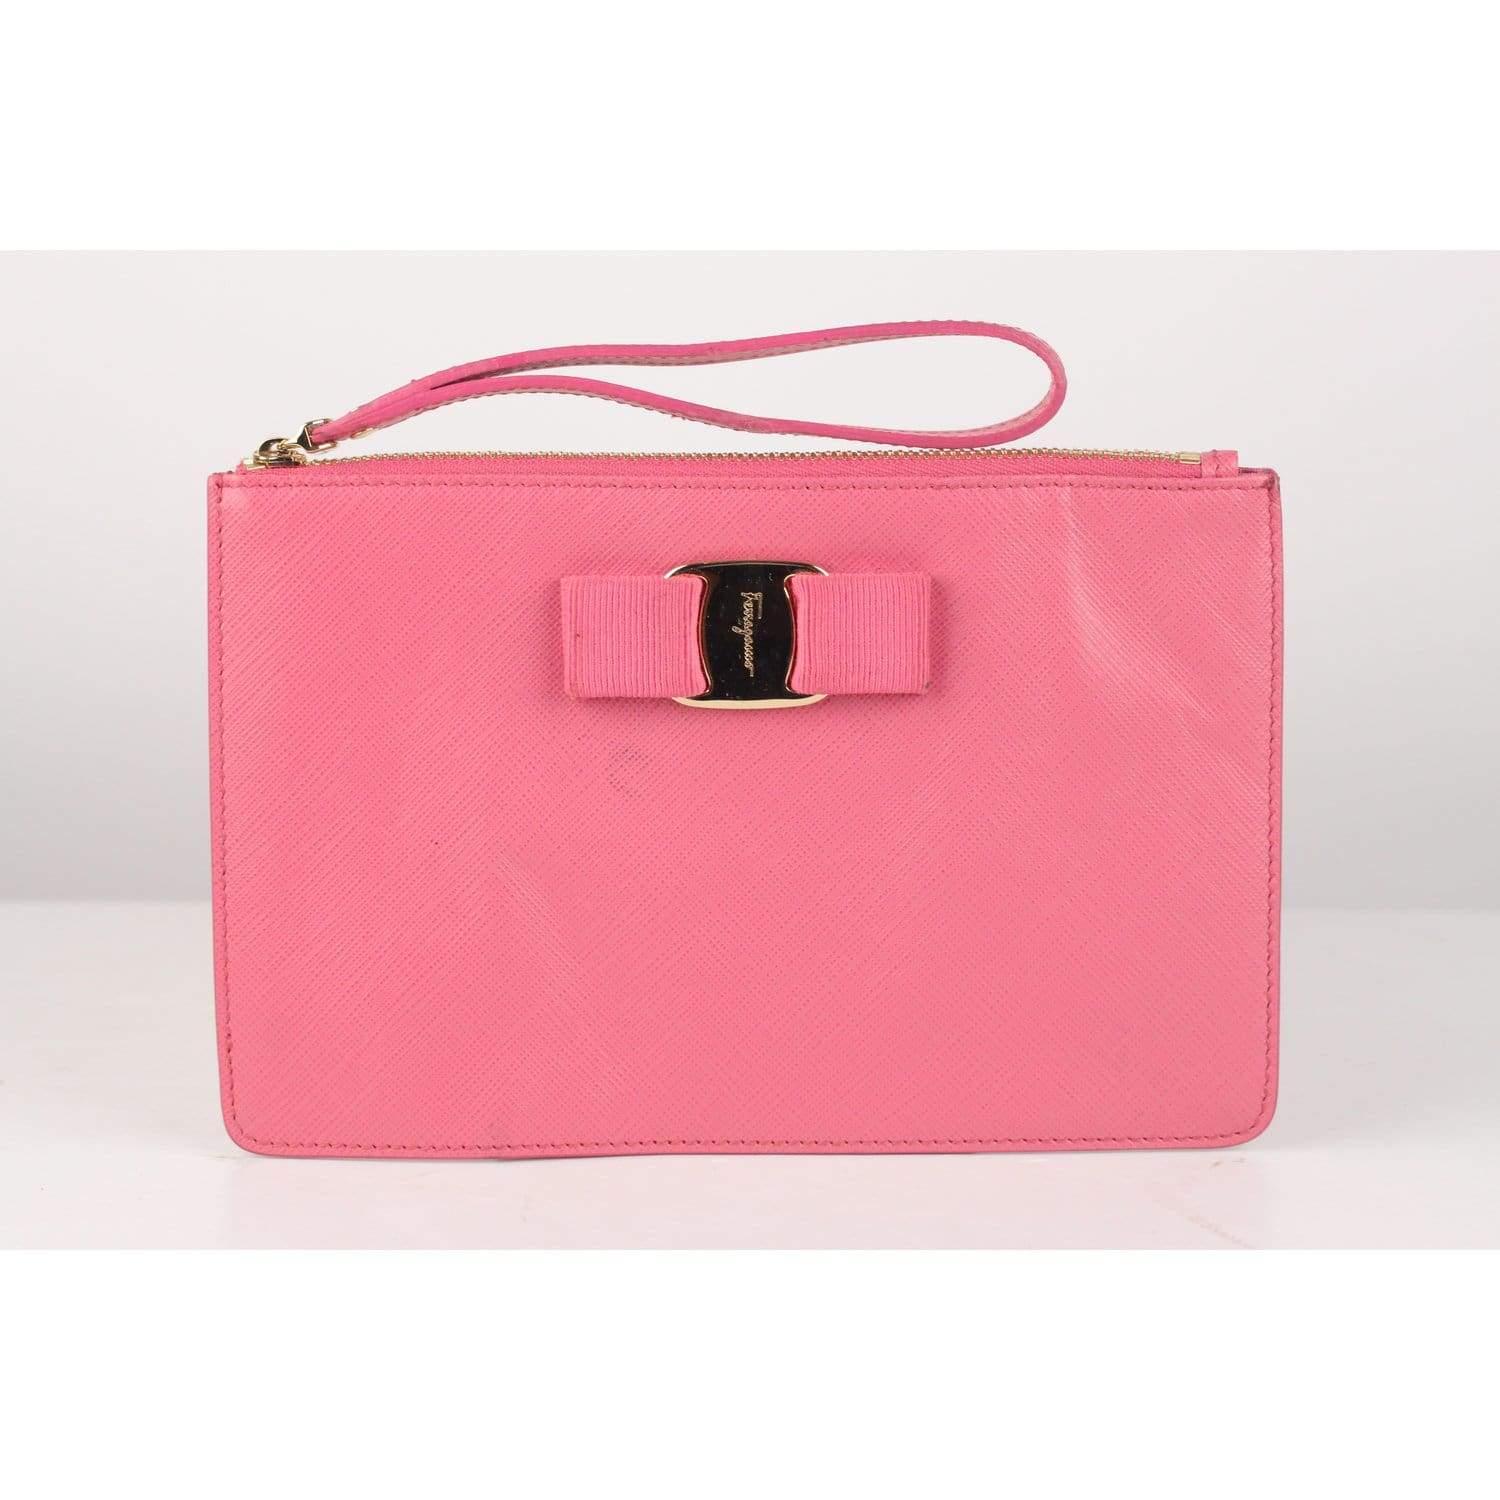 MATERIAL: Leather COLOR: Pink MODEL: Wristlet GENDER: Women SIZE: Small Condition CONDITION DETAILS: B :GOOD CONDITION - Some light wear of use - Some darkness on leather on the front and on the back, some darkness on the bow Measurements